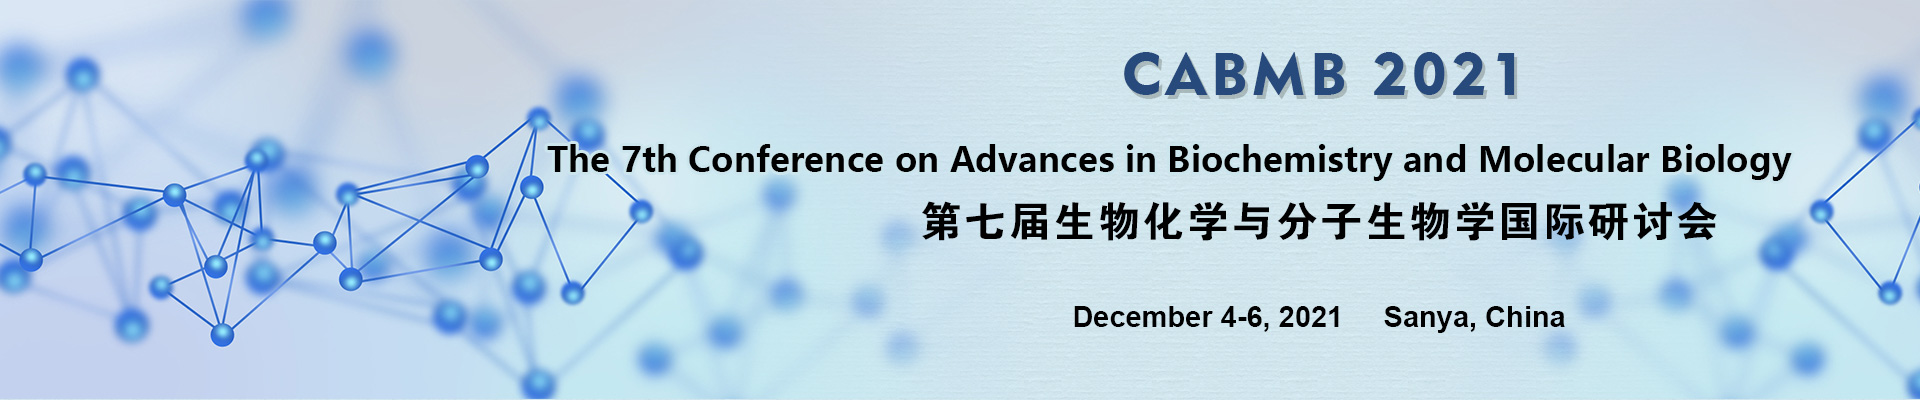 The 7th Conference on Advances in Biochemistry and Molecular Biology (CABMB 2021), Sanya, Hainan, China